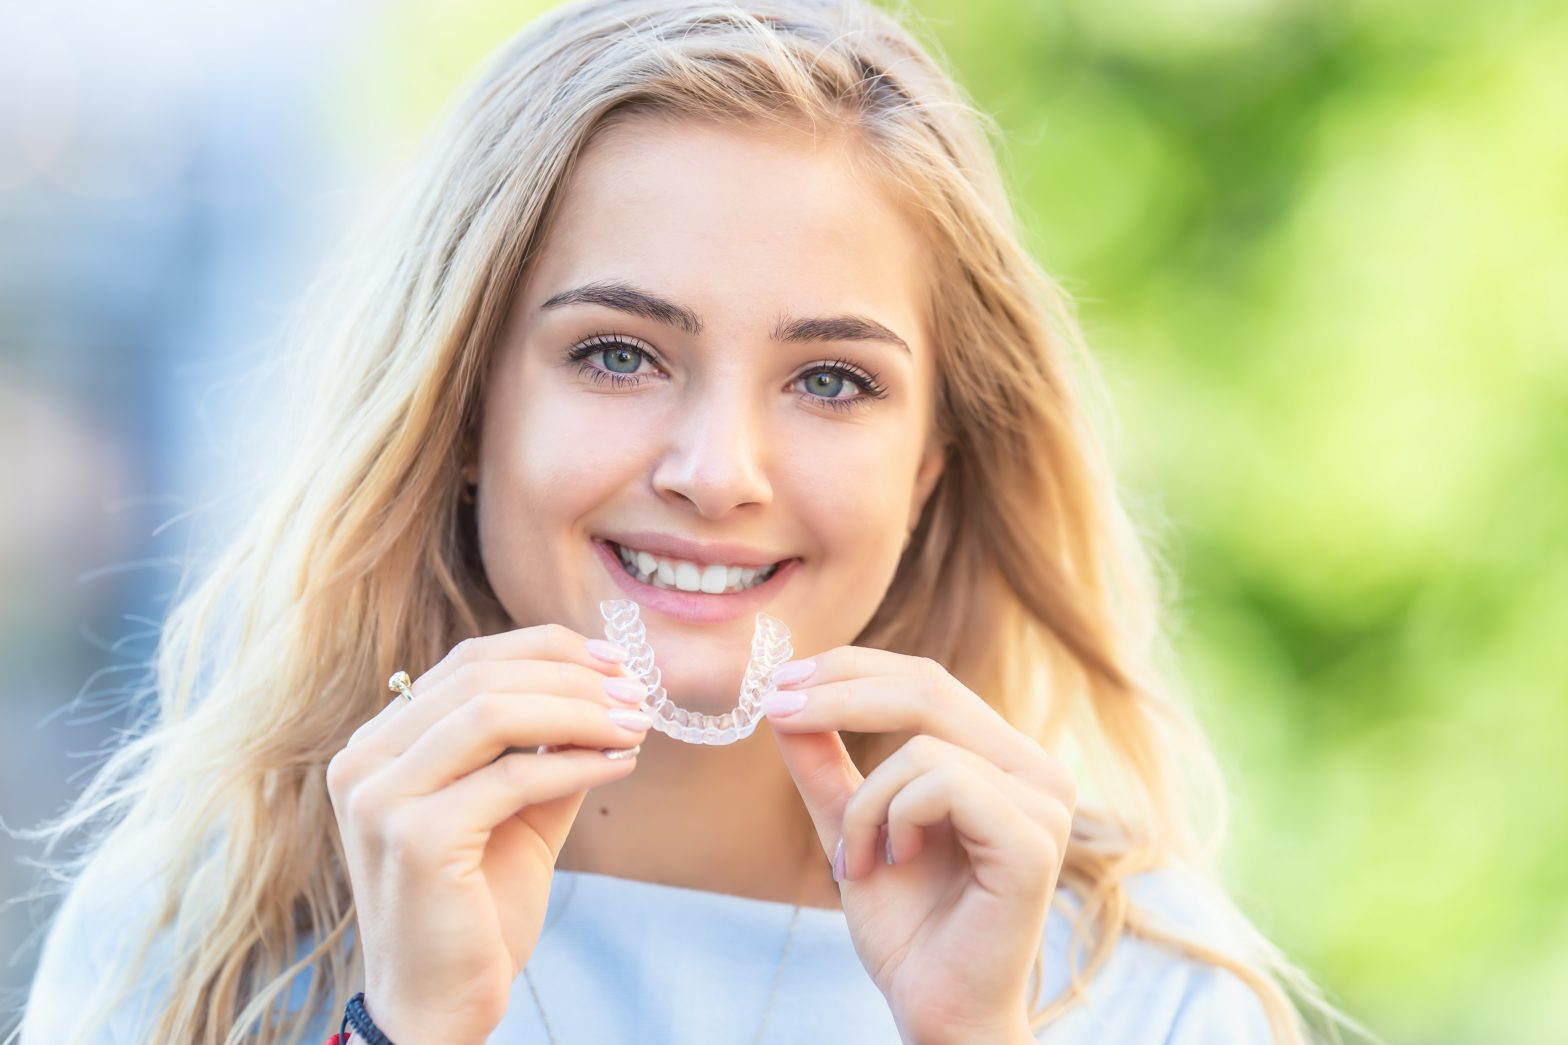 All The Questions You Need Answered About Straightening Teeth With Invisalign